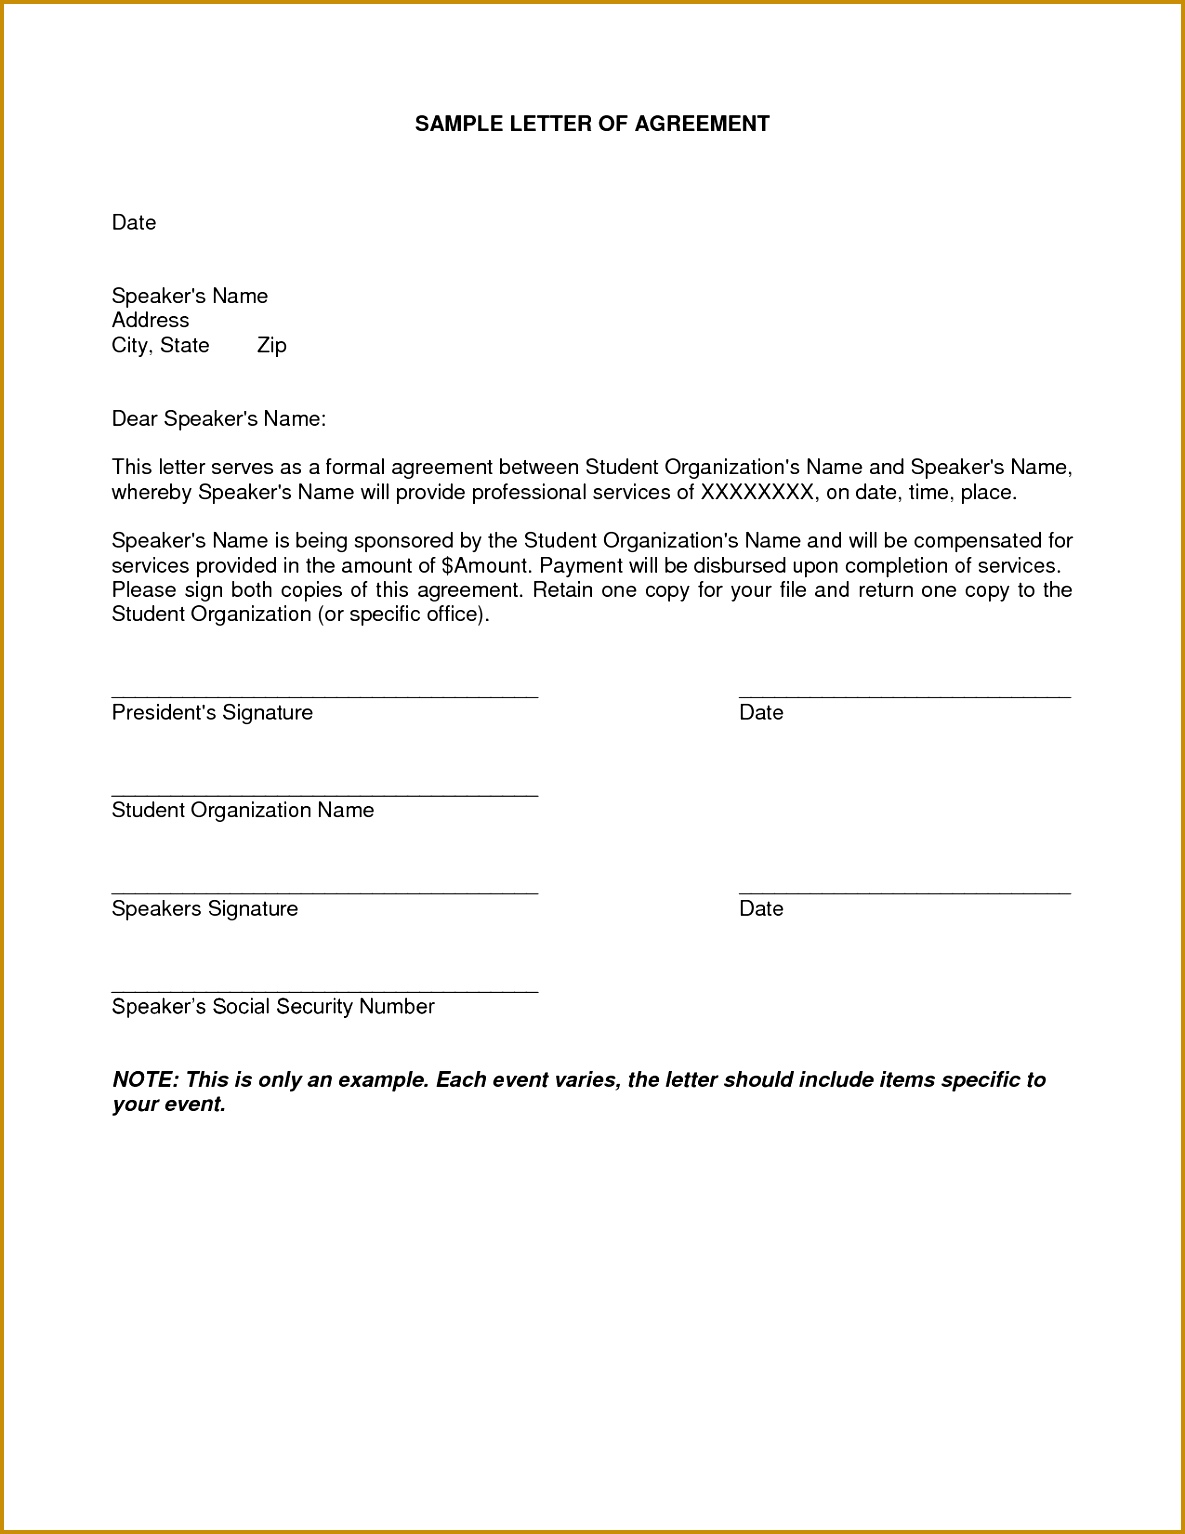 Family Loan Agreement Beautiful Letter Agreement Samples Template Seeabruzzo Letter 15341185